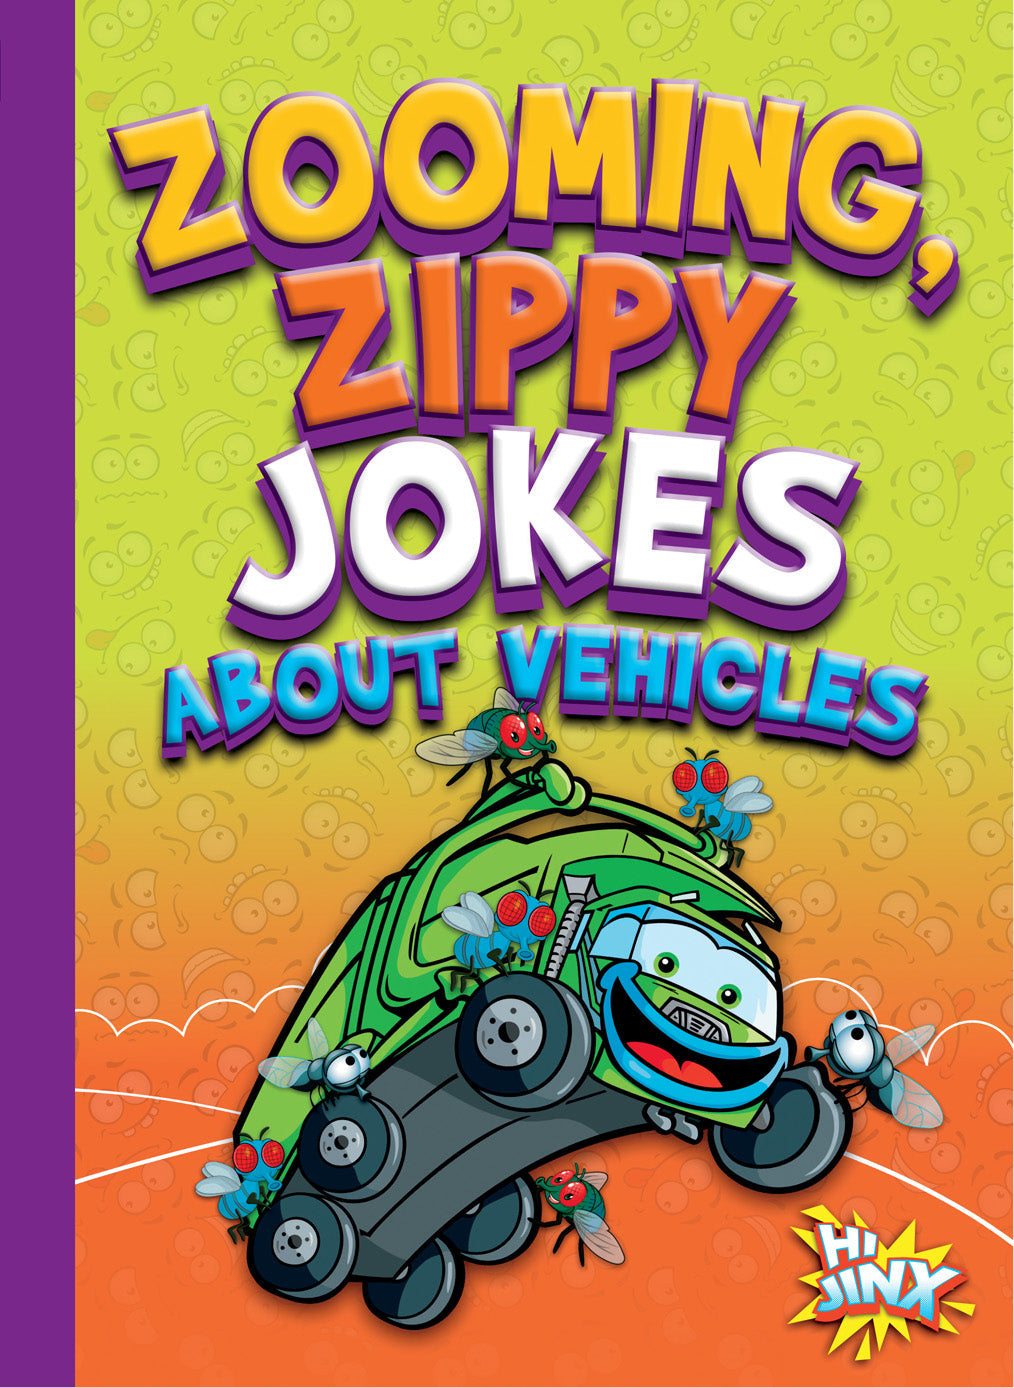 Just for Laughs: Zooming, Zippy Jokes about Vehicles